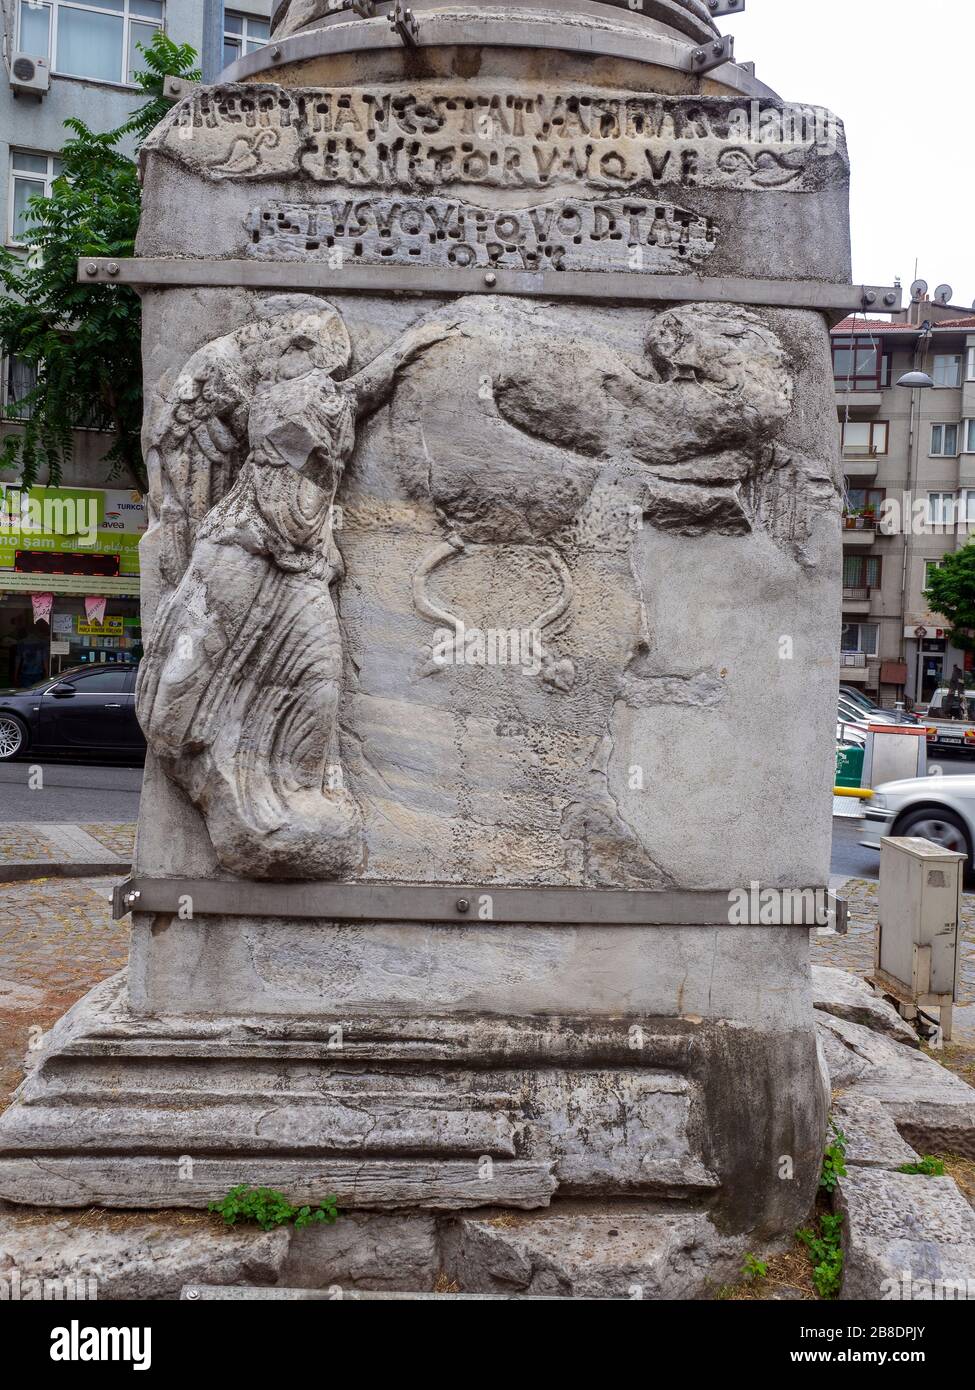 The Kiztasi or Markianos Column. A monument commemorating the Byzantine Emperor Markianos in Istanbul in 455. It is located in Fatih district of Istan Stock Photo